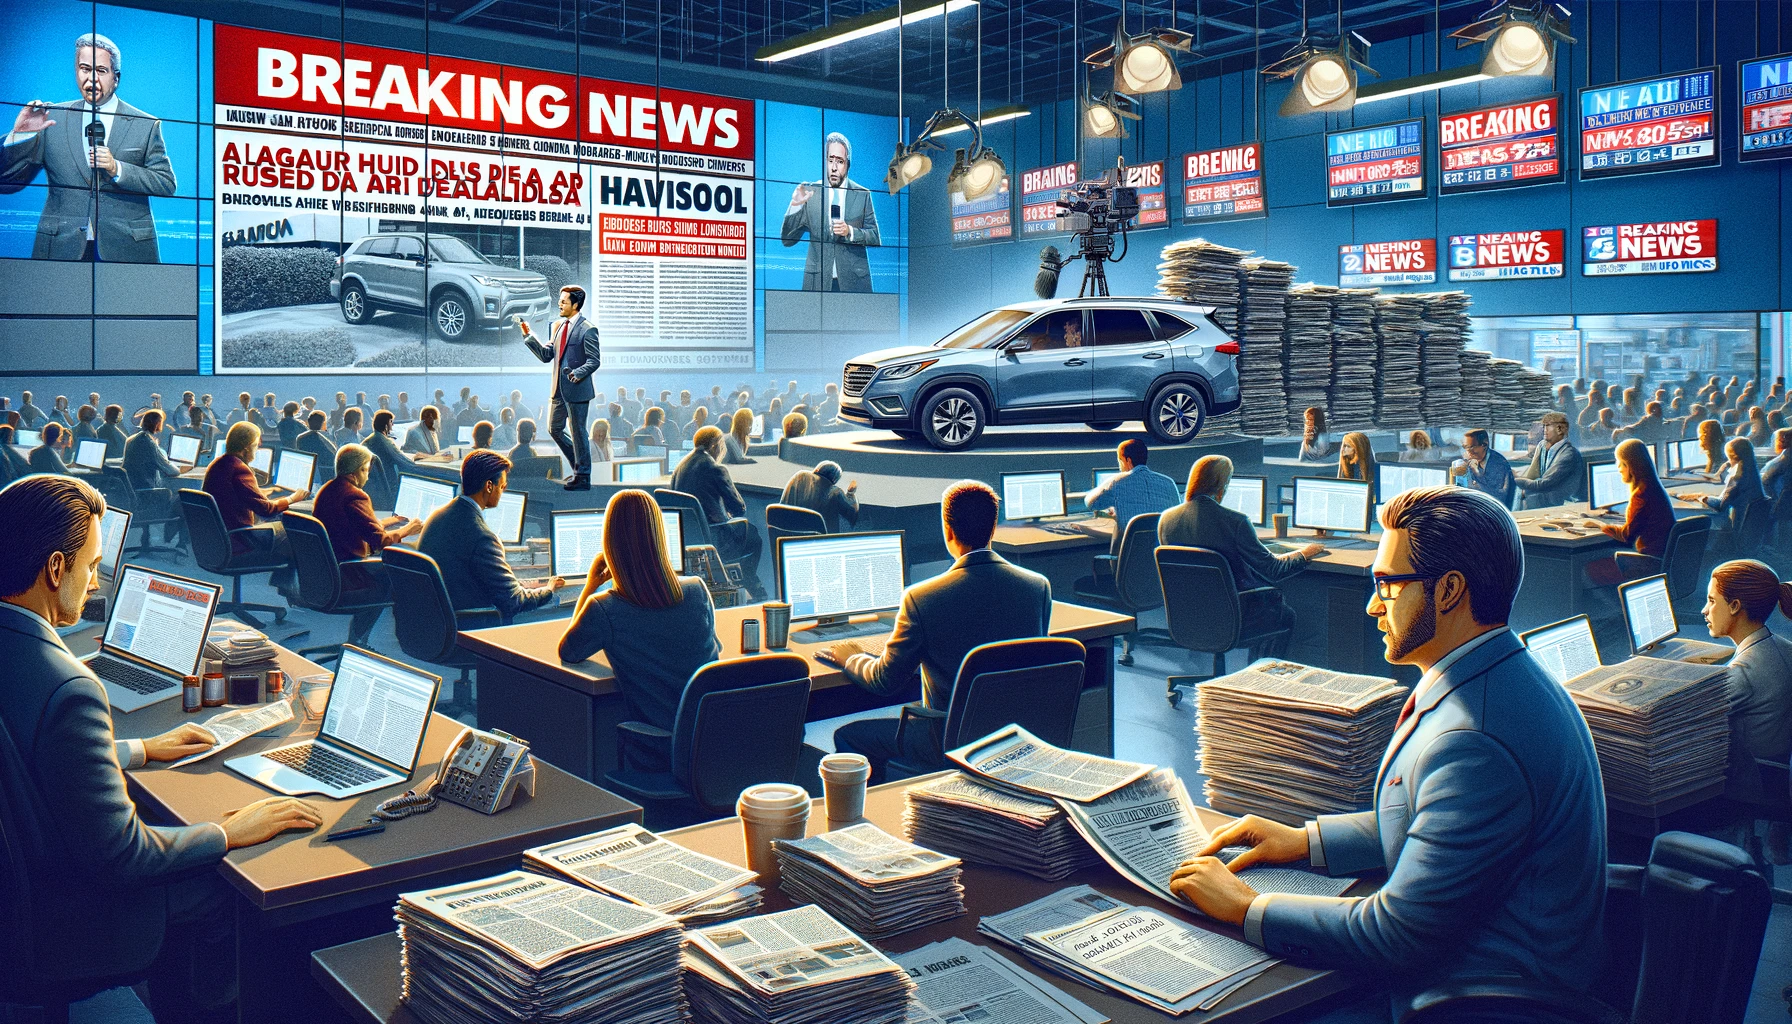 An image illustrating the moment a major scandal involving a large used car dealership is exposed. The scene shows a bustling newsroom with journalists and reporters working fervently. Multiple screens display breaking news about the dealership's fraudulent practices. In the foreground, a reporter is seen broadcasting live, holding documents that reveal the misconduct. The background is filled with busy journalists discussing and typing rapidly, with newspapers and coffee cups scattered around. The overall mood is hectic yet determined, underlined by the urgency of exposing the truth.